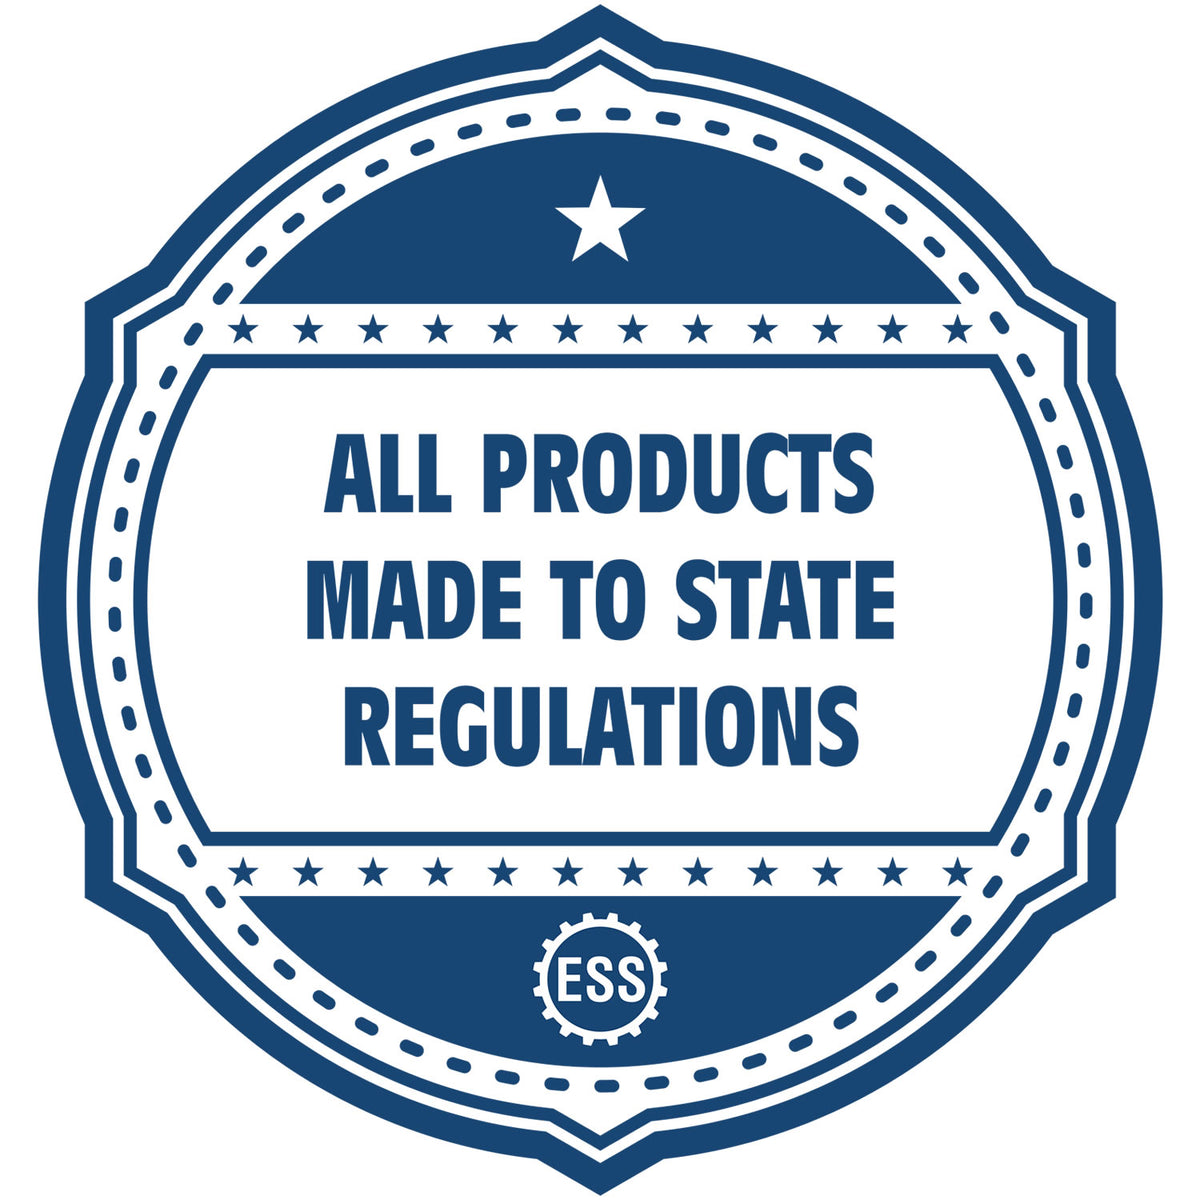 An icon or badge element for the Slim Pre-Inked State Seal Notary Stamp for Utah showing that this product is made in compliance with state regulations.